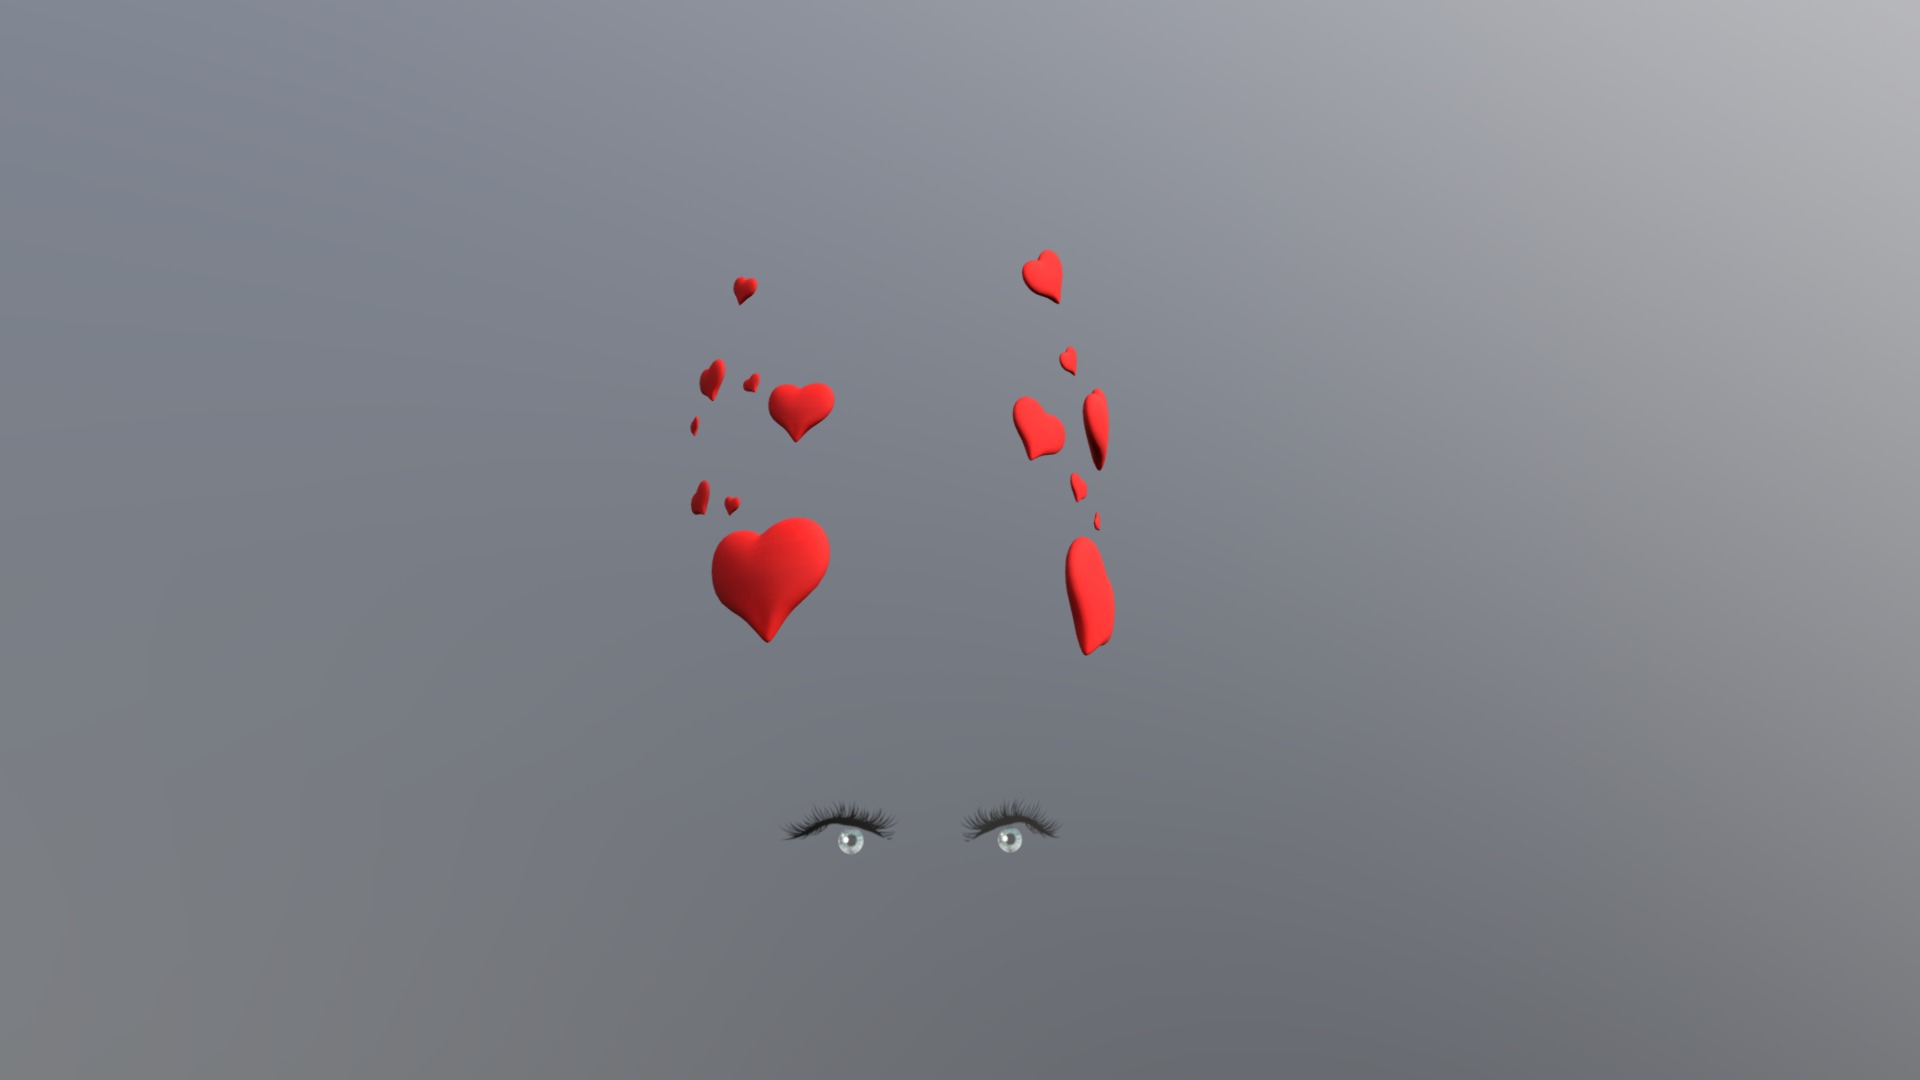 3D model Beauty-filter-sprites-v1 - This is a 3D model of the Beauty-filter-sprites-v1. The 3D model is about a group of balloons floating in the sky.